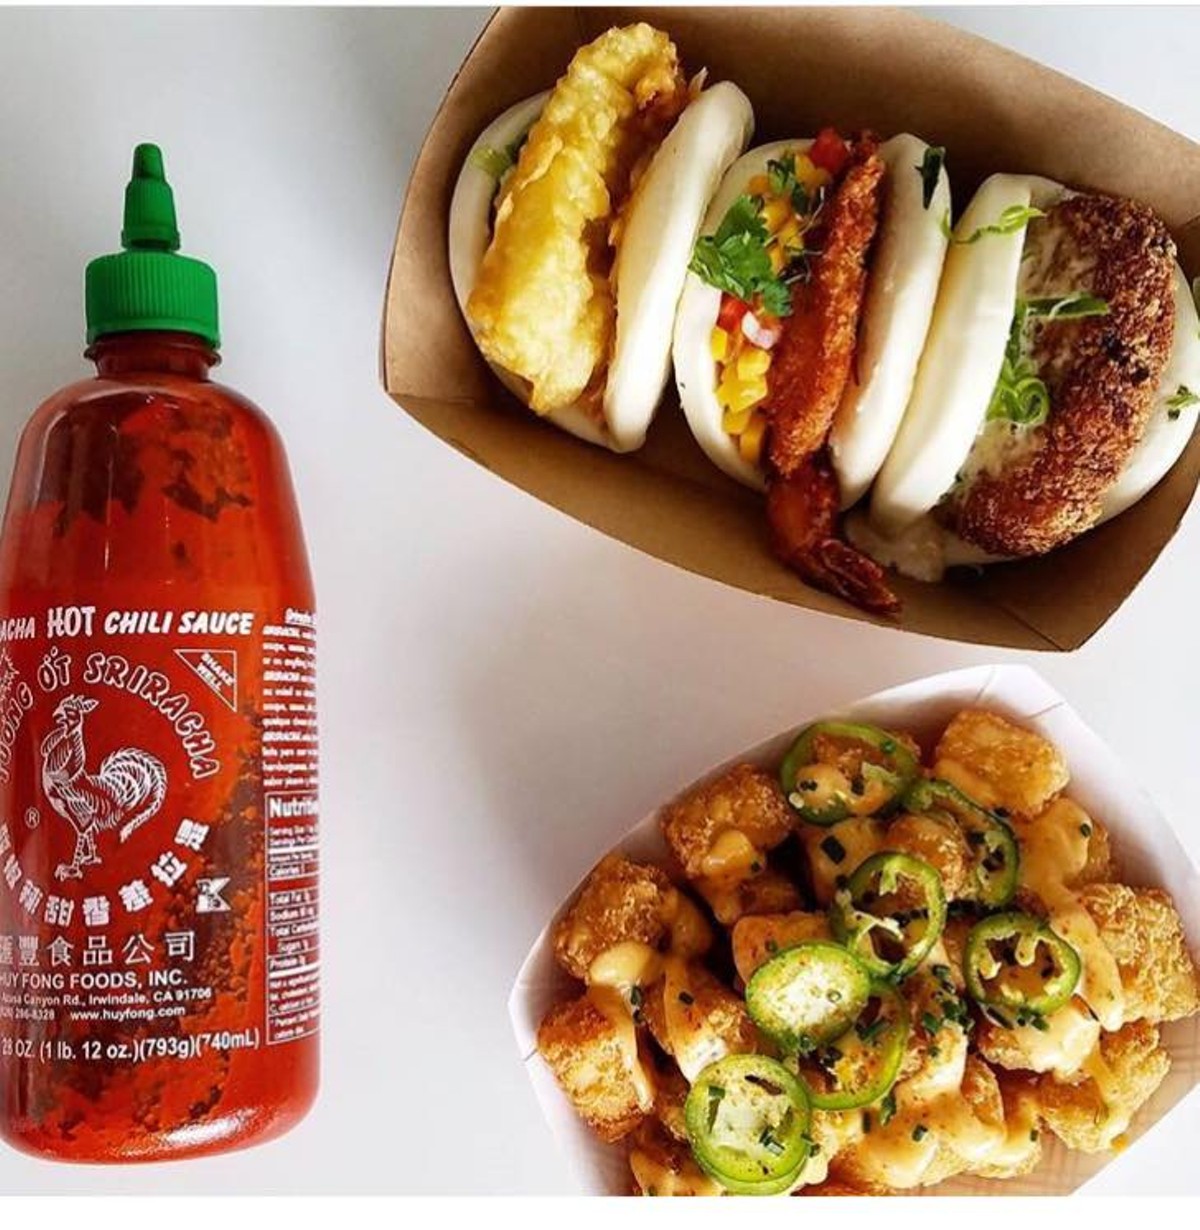 King Bao opening second location, Z Asian coming to Colonial, plus more in Orlando foodie news